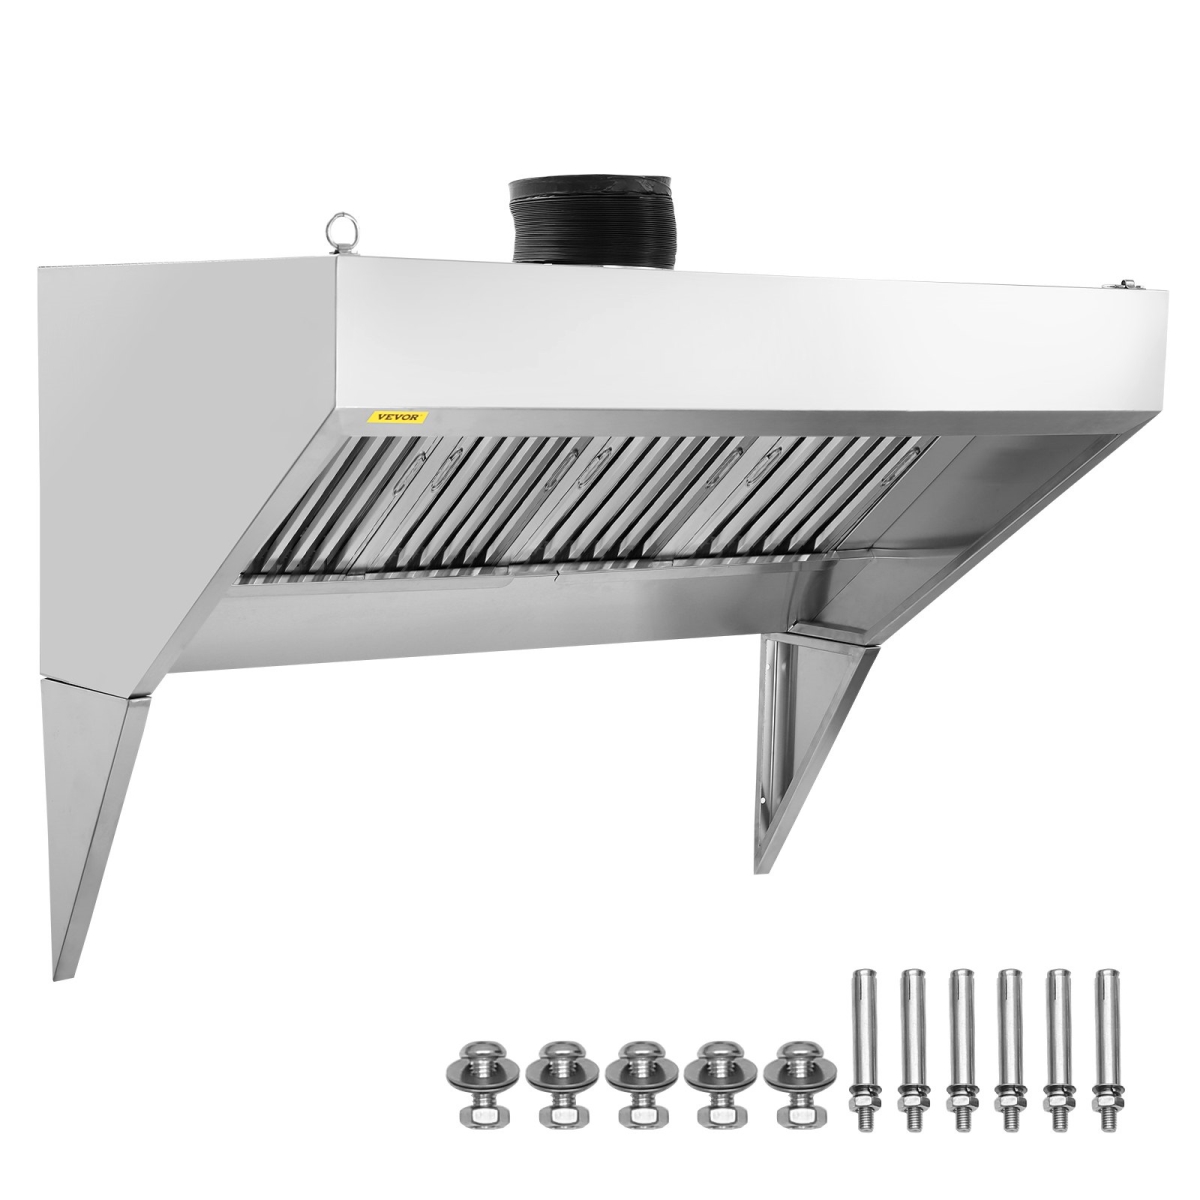 Picture of Vevor SYPYZYC8075HP0J29V0 8 ft. Commercial Exhaust Hood with 4 Detachable U-Shaped Grid Oil Filter Mesh